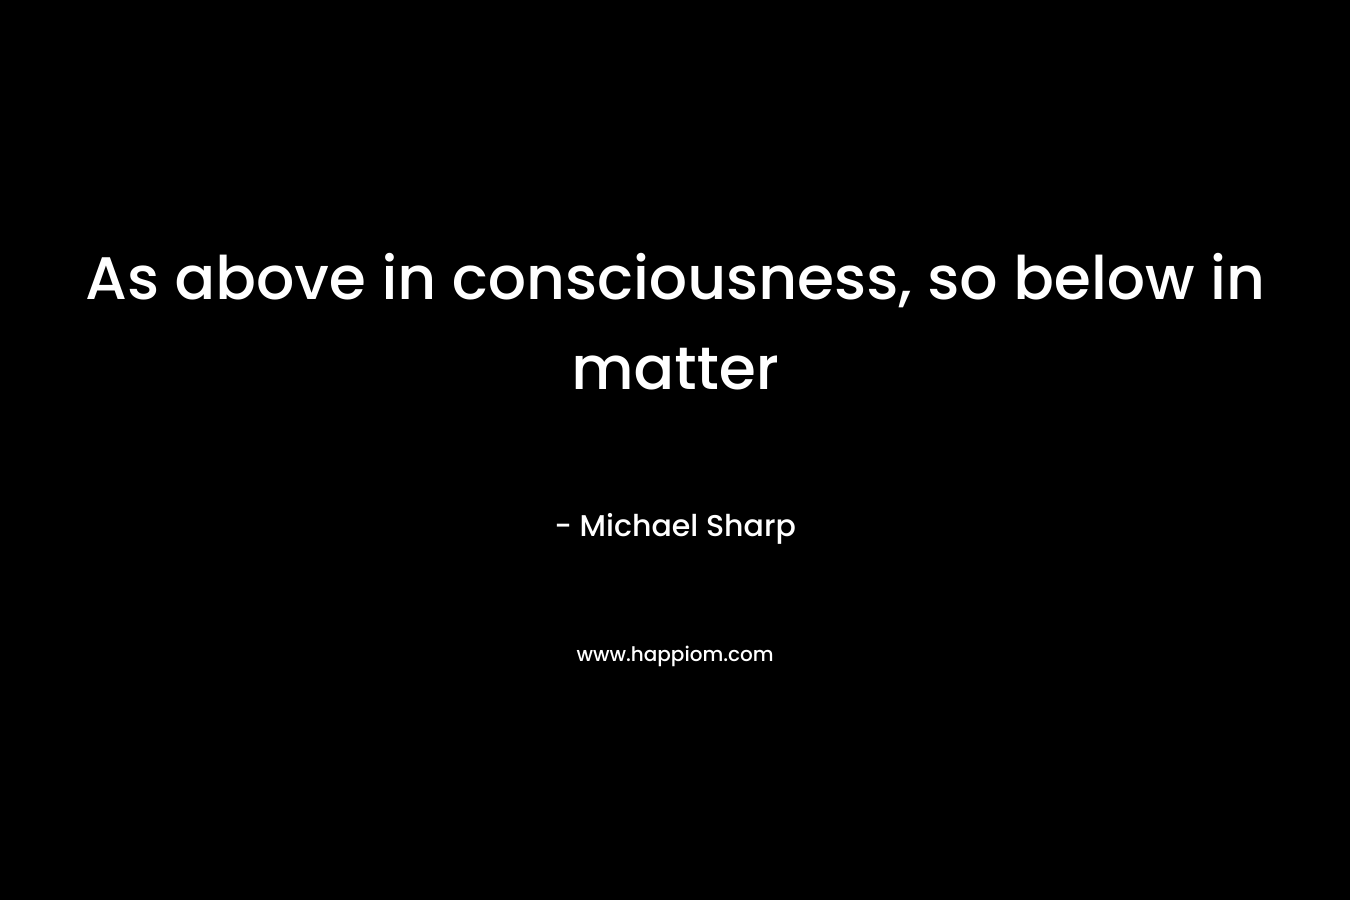 As above in consciousness, so below in matter